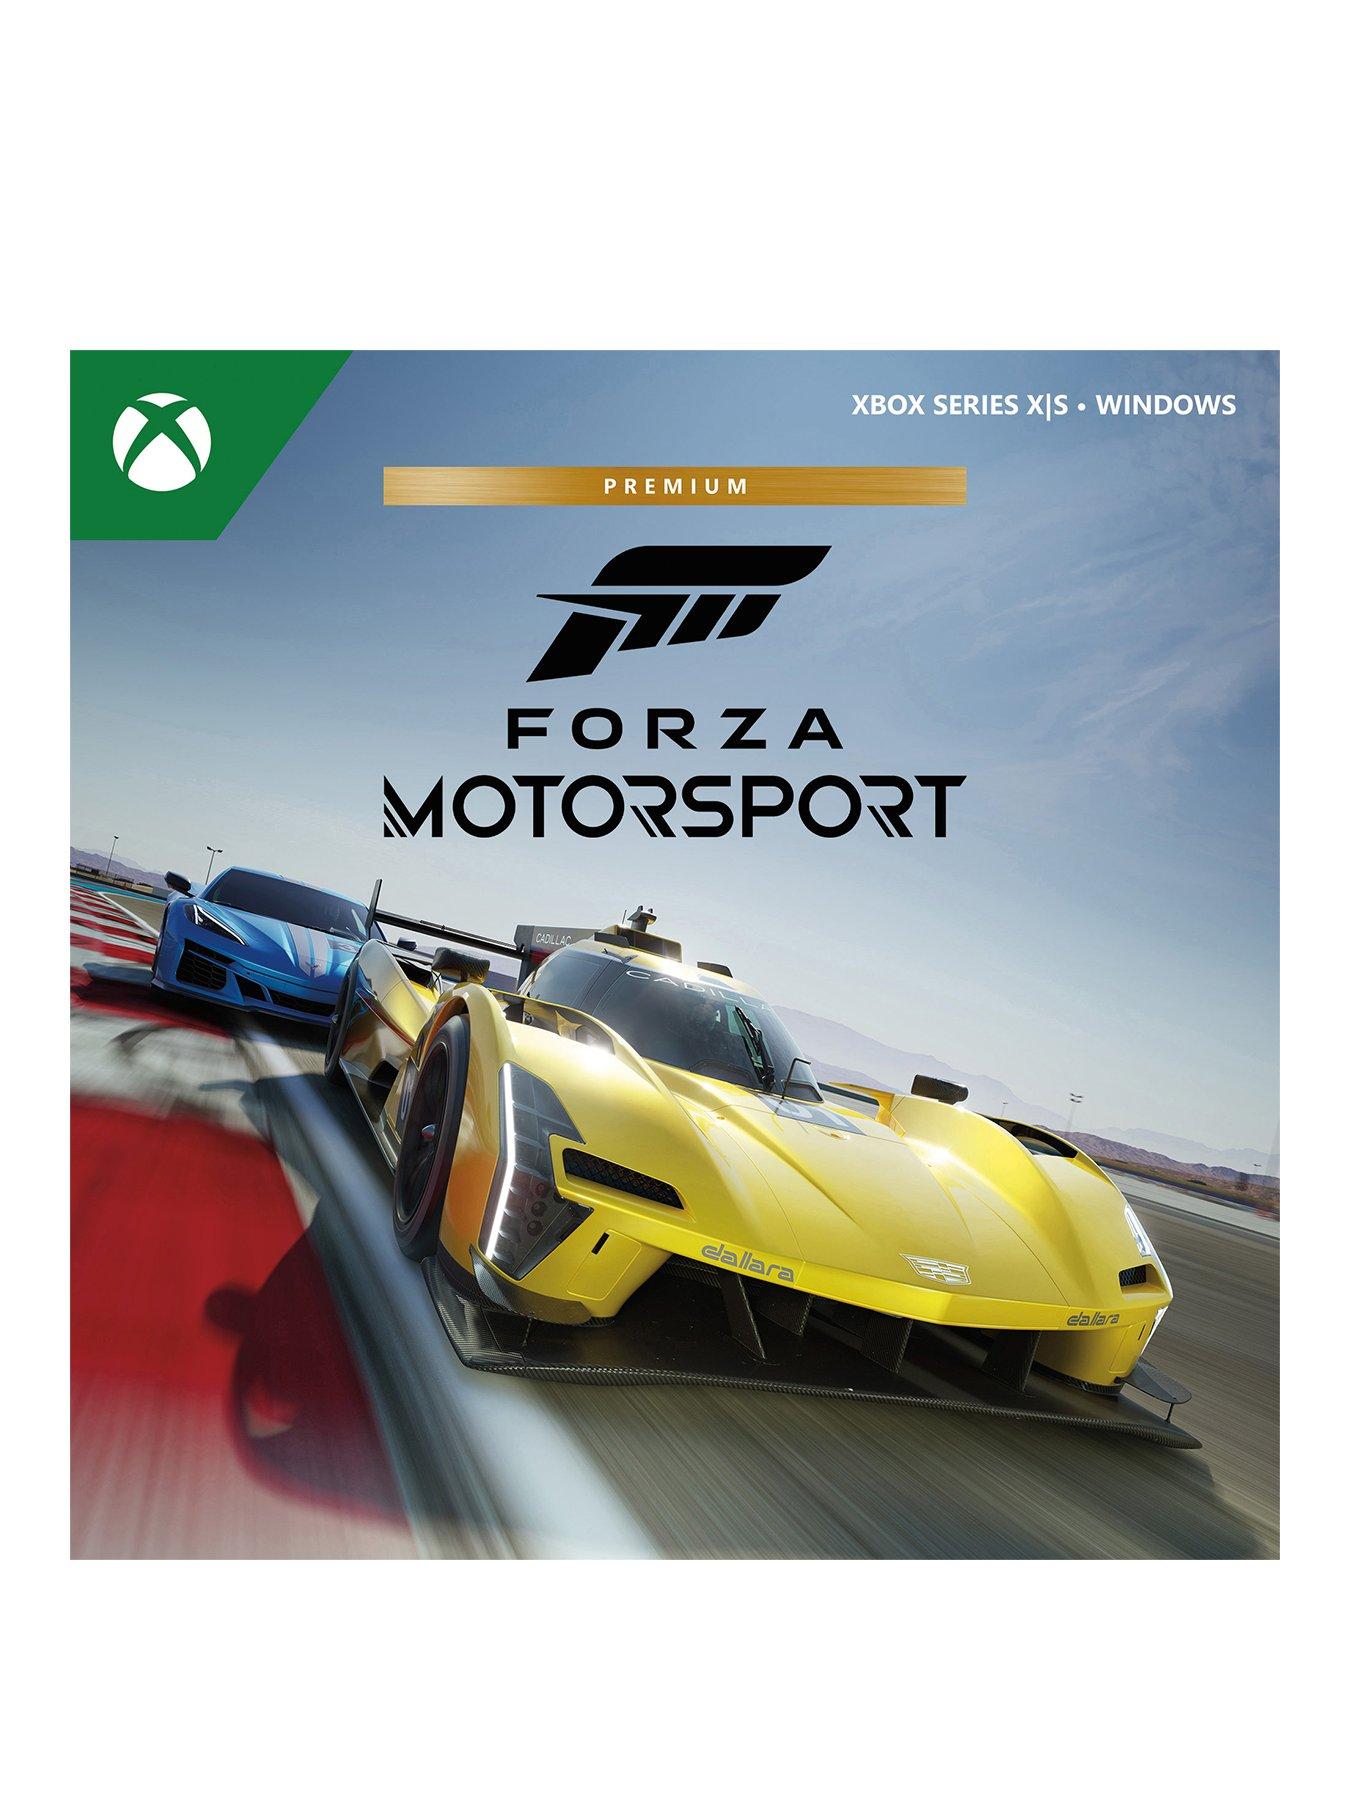 Xbox Live Gold Members Can Play Forza Motorsport 5 Free This